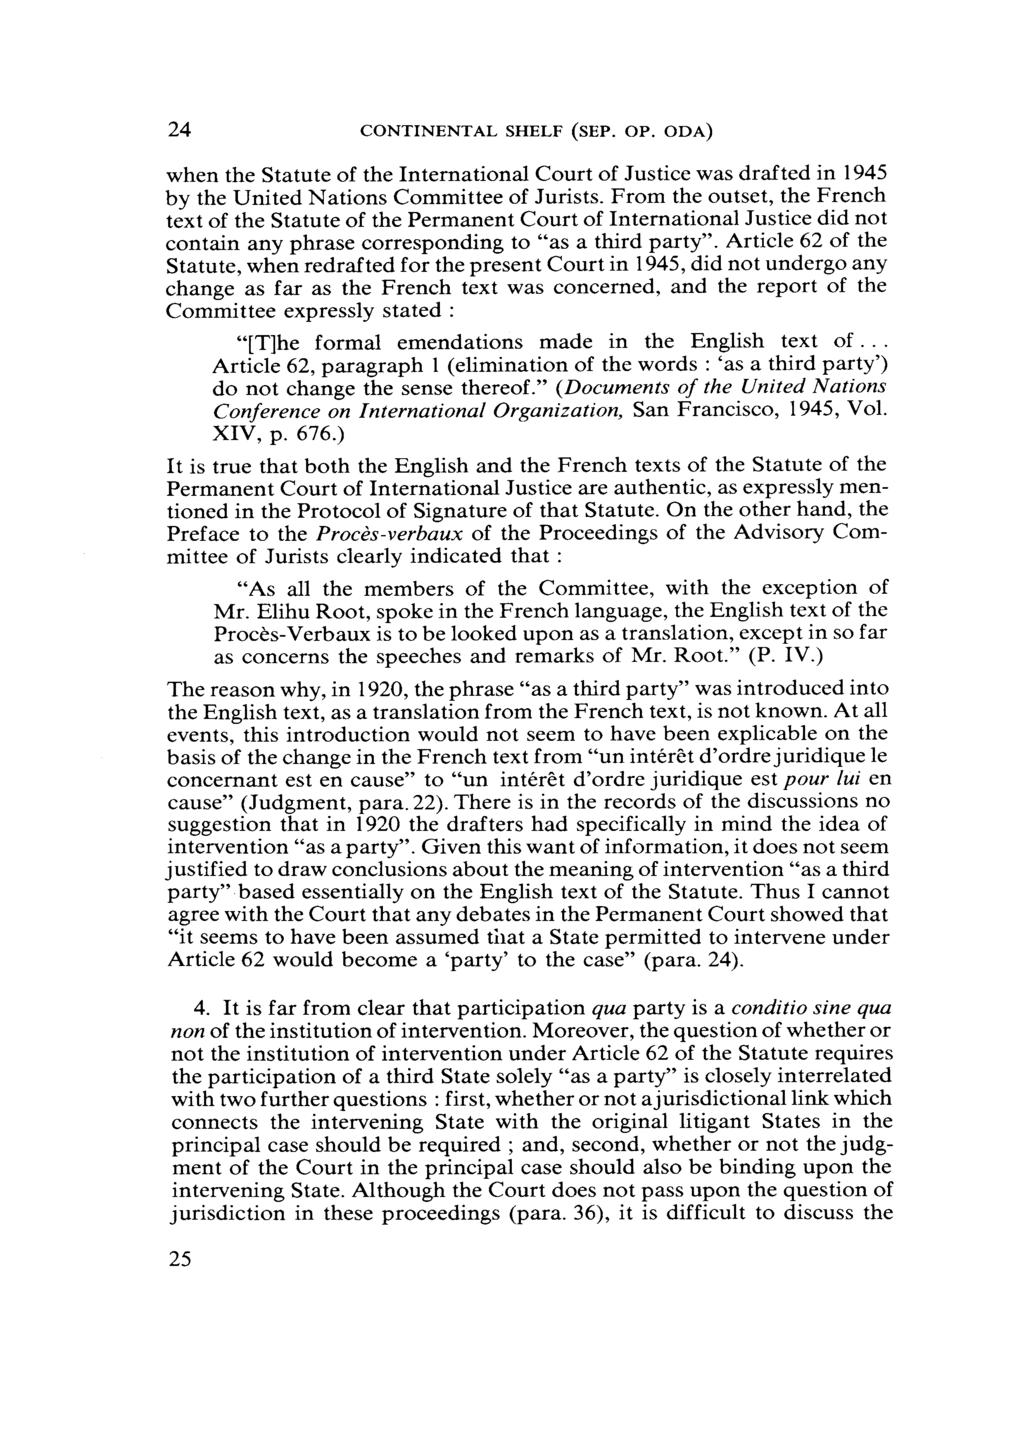 24 CONTINENTAL SHELF (SEP. OP. ODA) when the Statute of the International Court of Justice was drafted in 1945 by the United Nations Committee of Jurists.